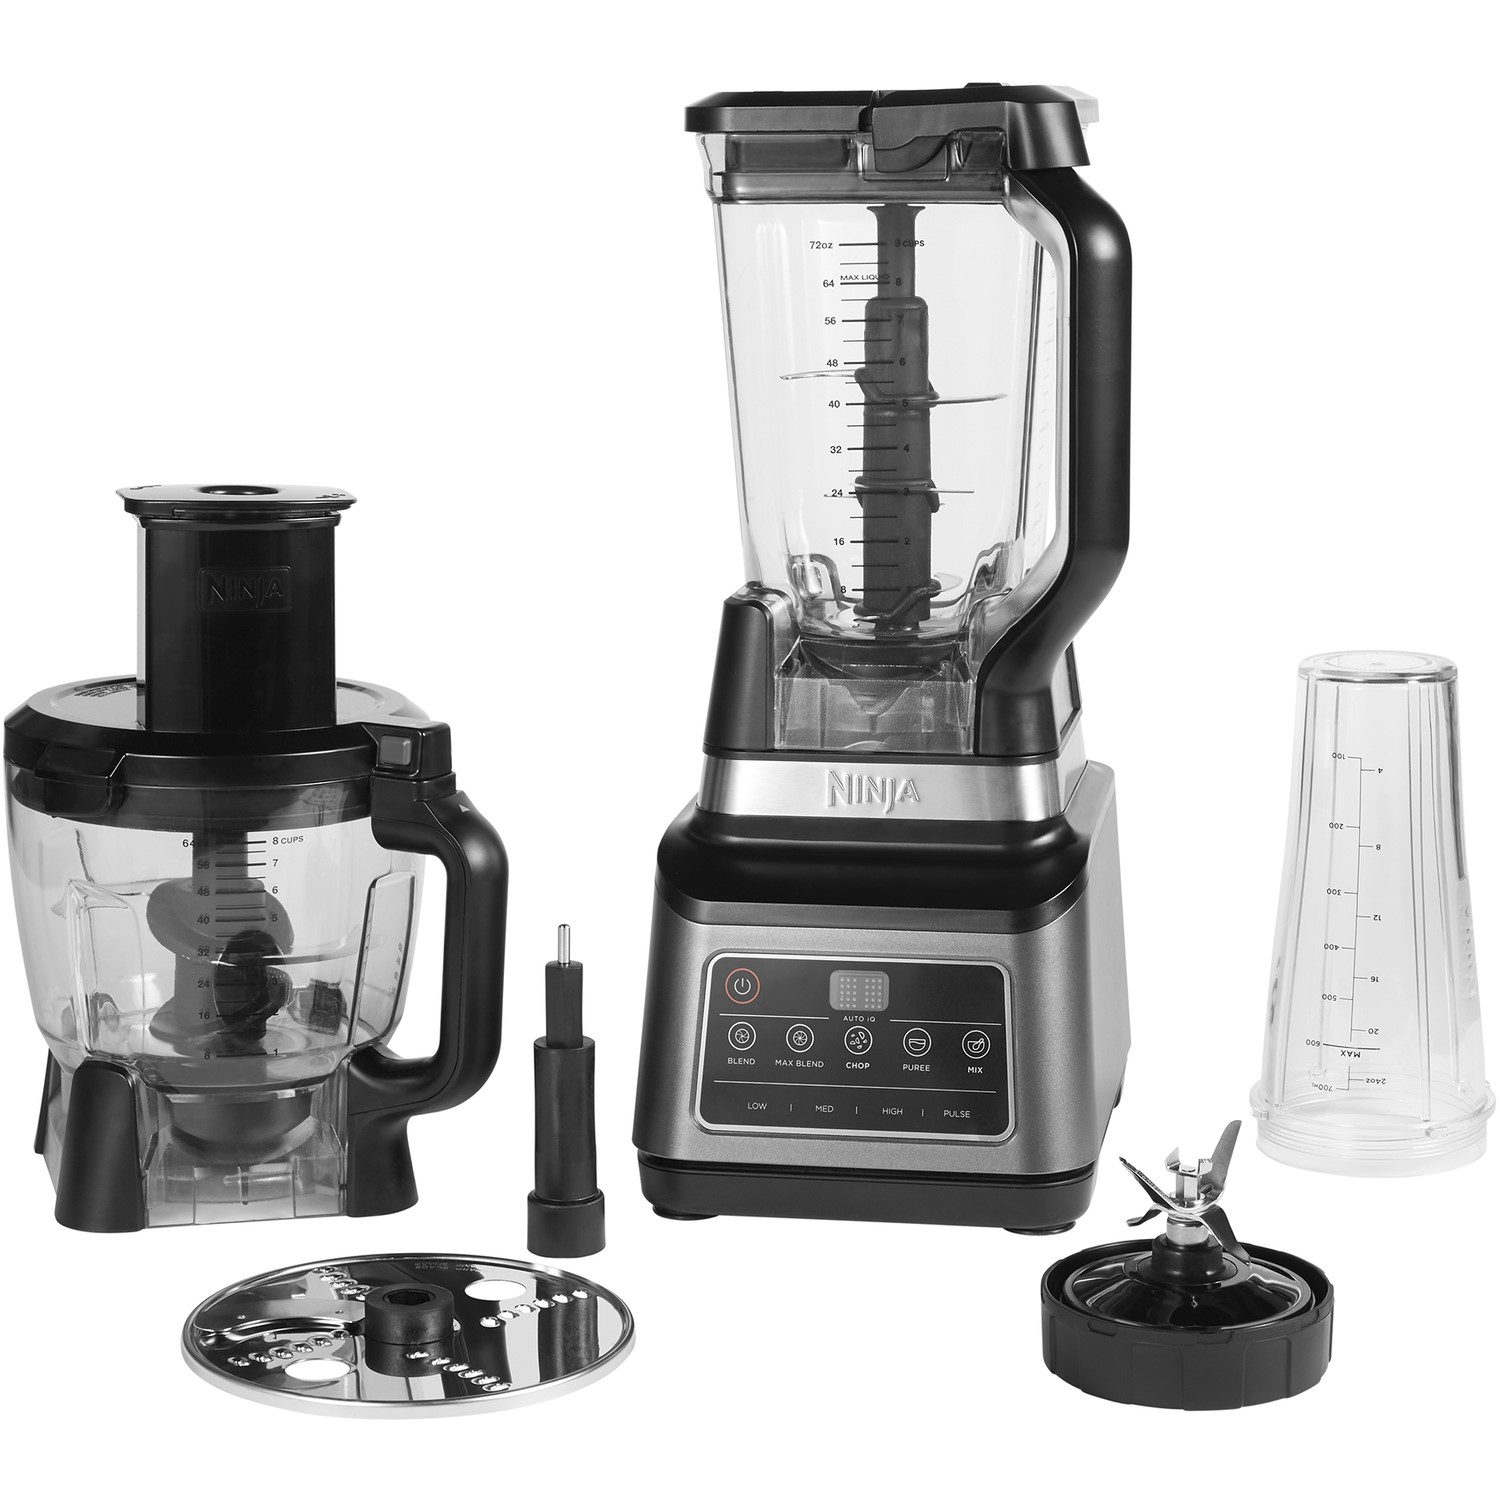 Ninja 3 n 1 Food Processor - Blender And Smoothie Maker With Auto-IQ - Grey